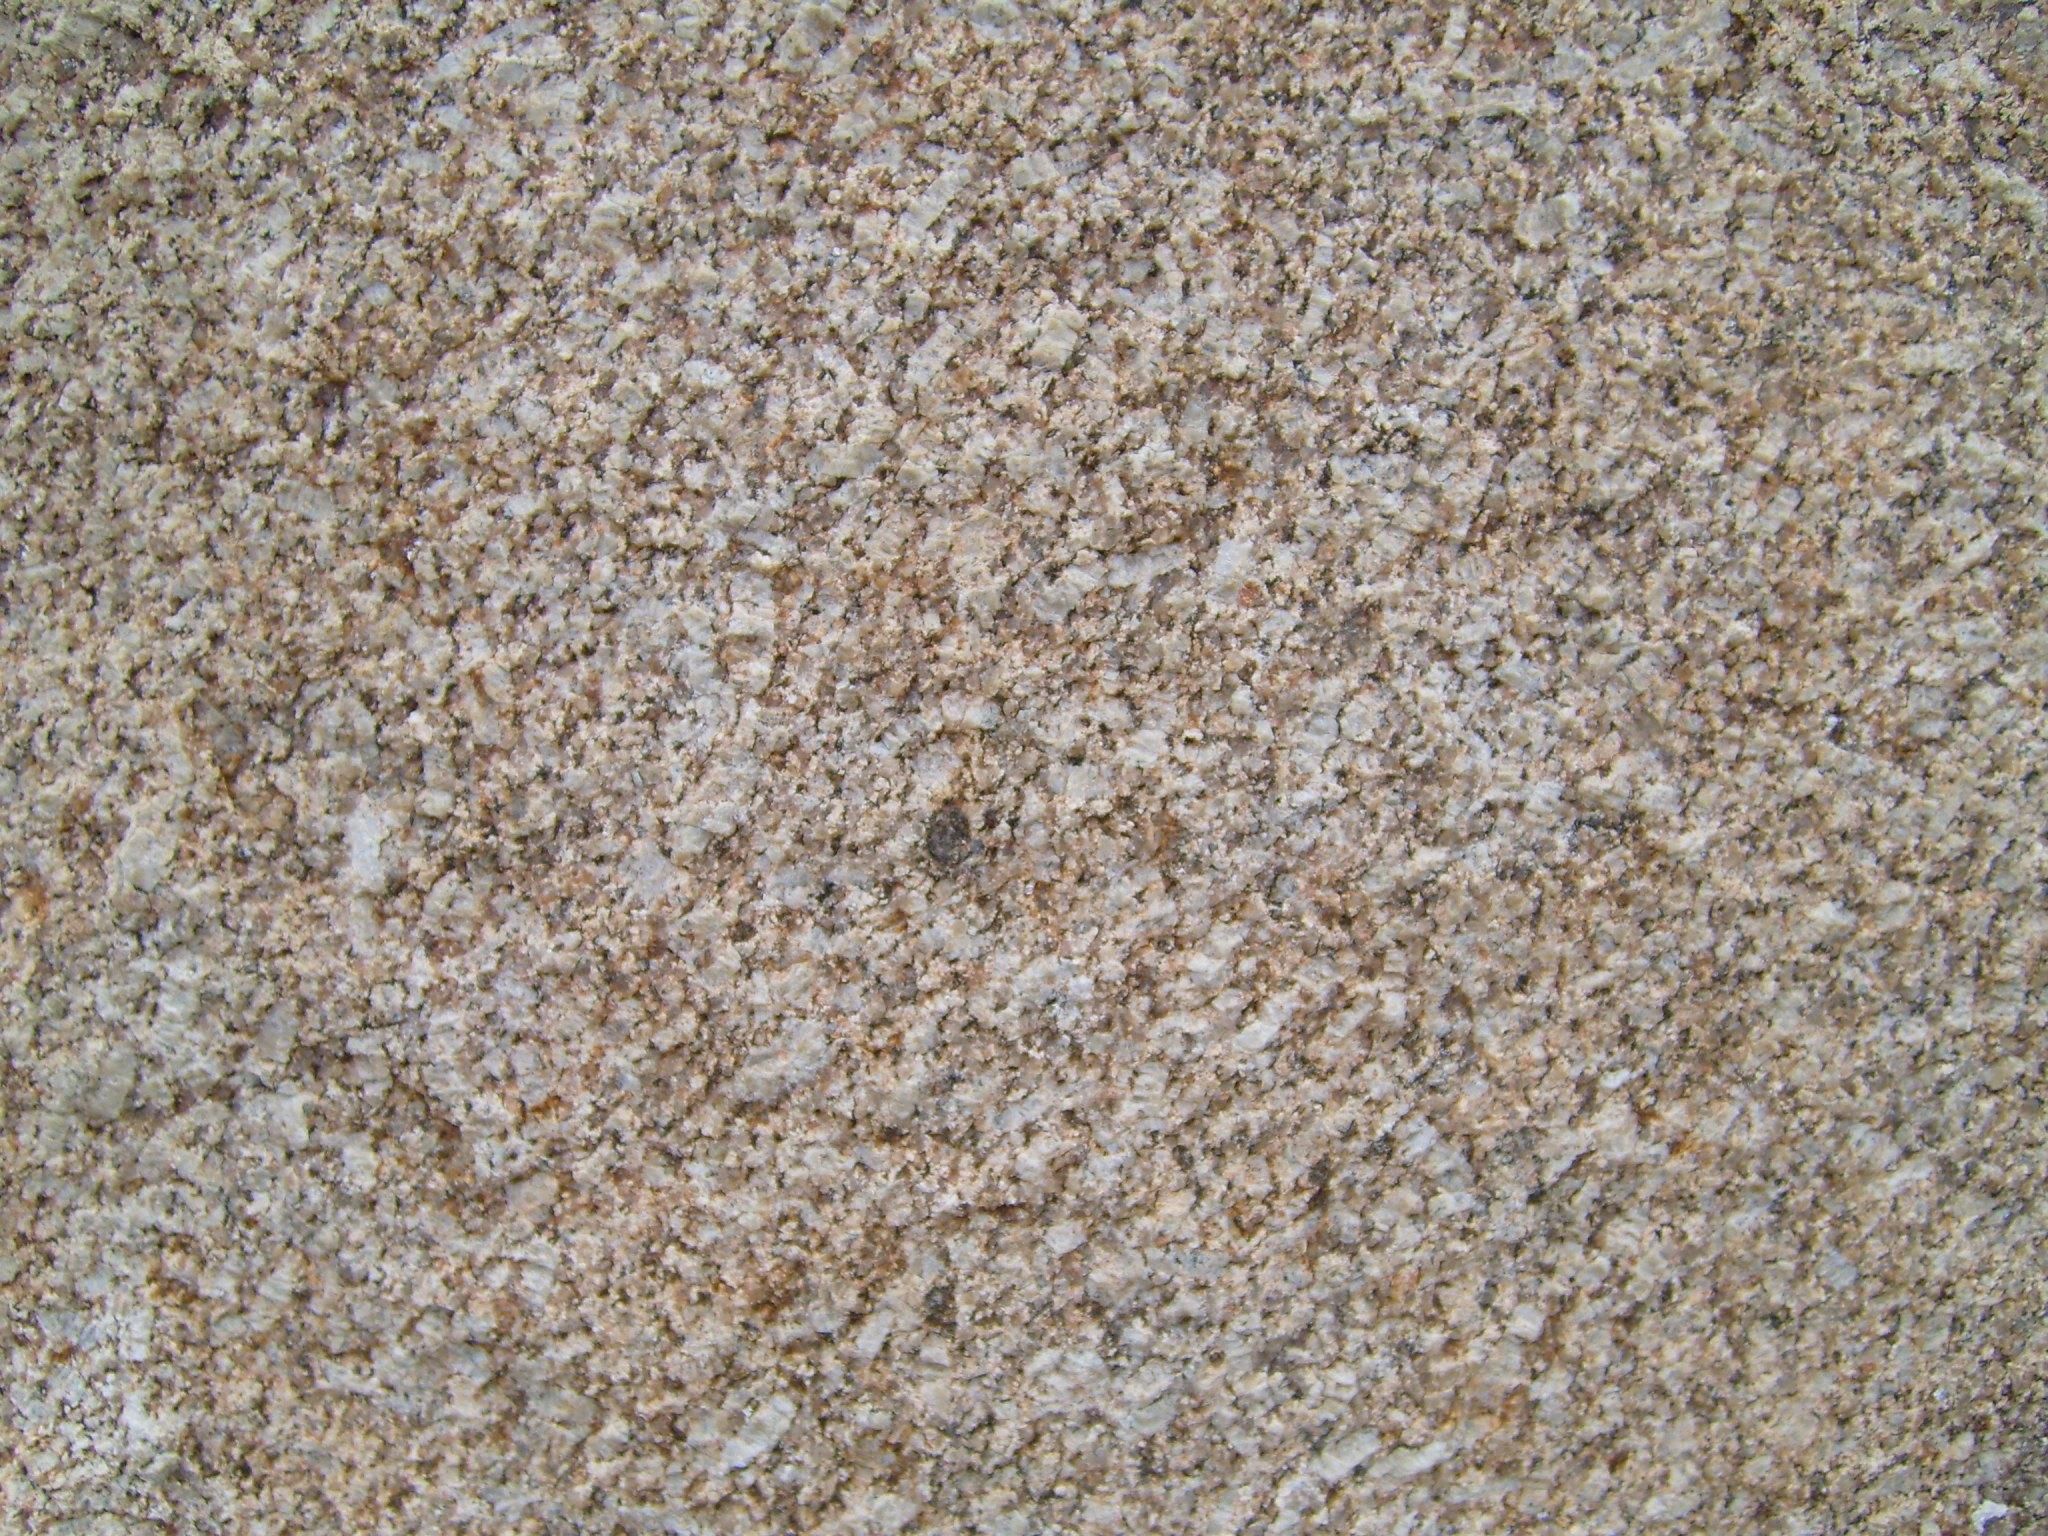 File:Marble stone surface.jpg - Wikimedia Commons